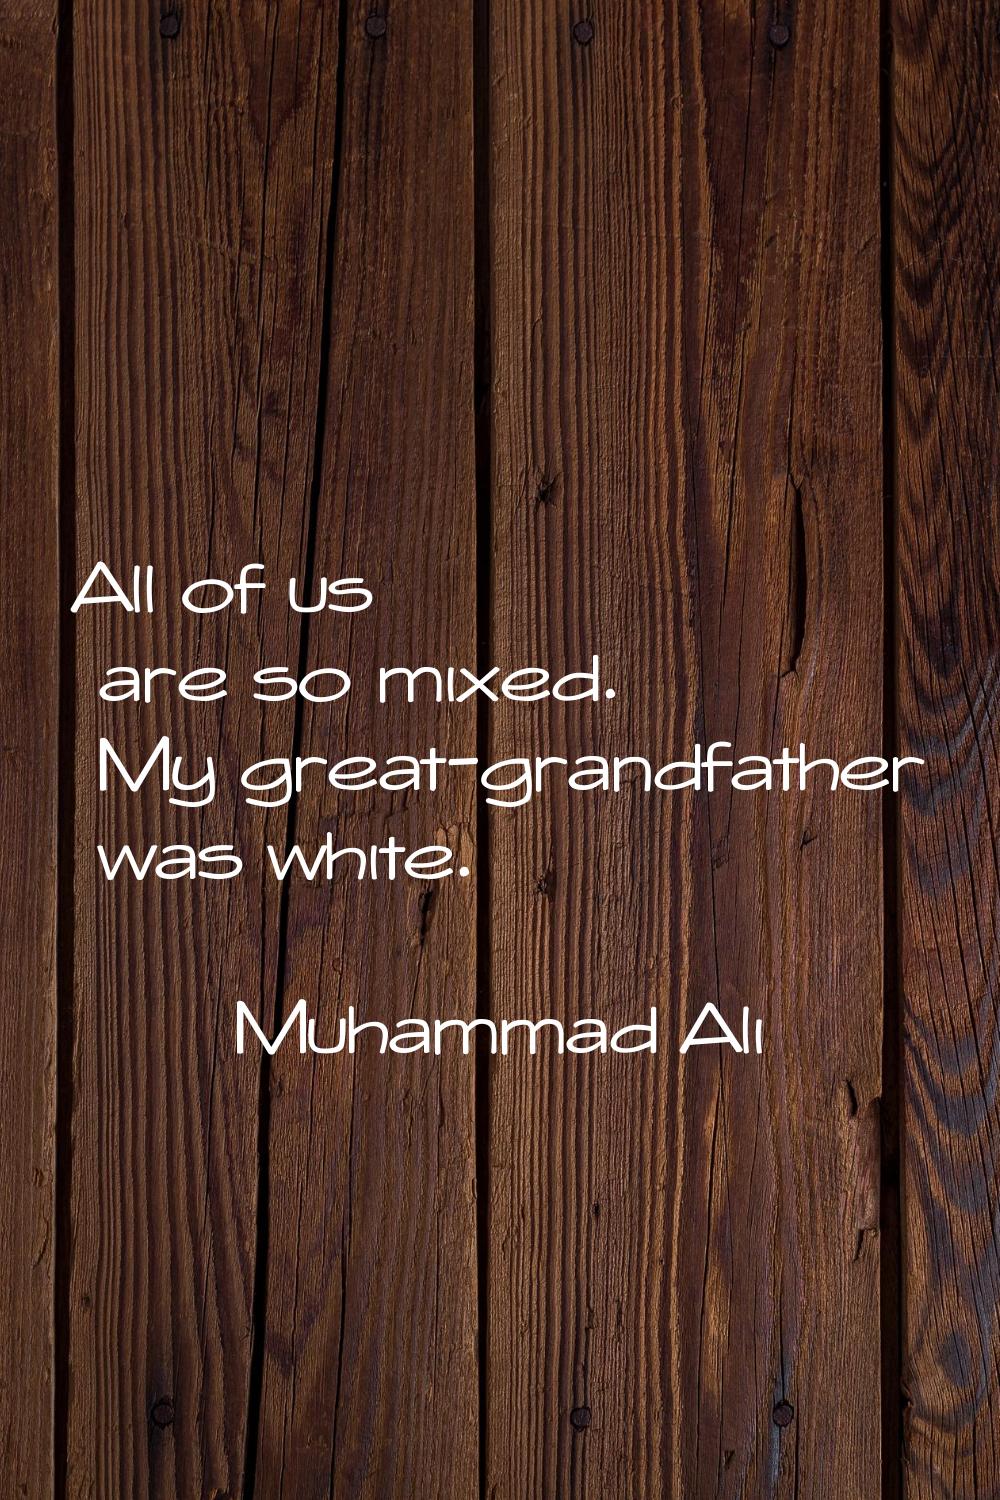 All of us are so mixed. My great-grandfather was white.